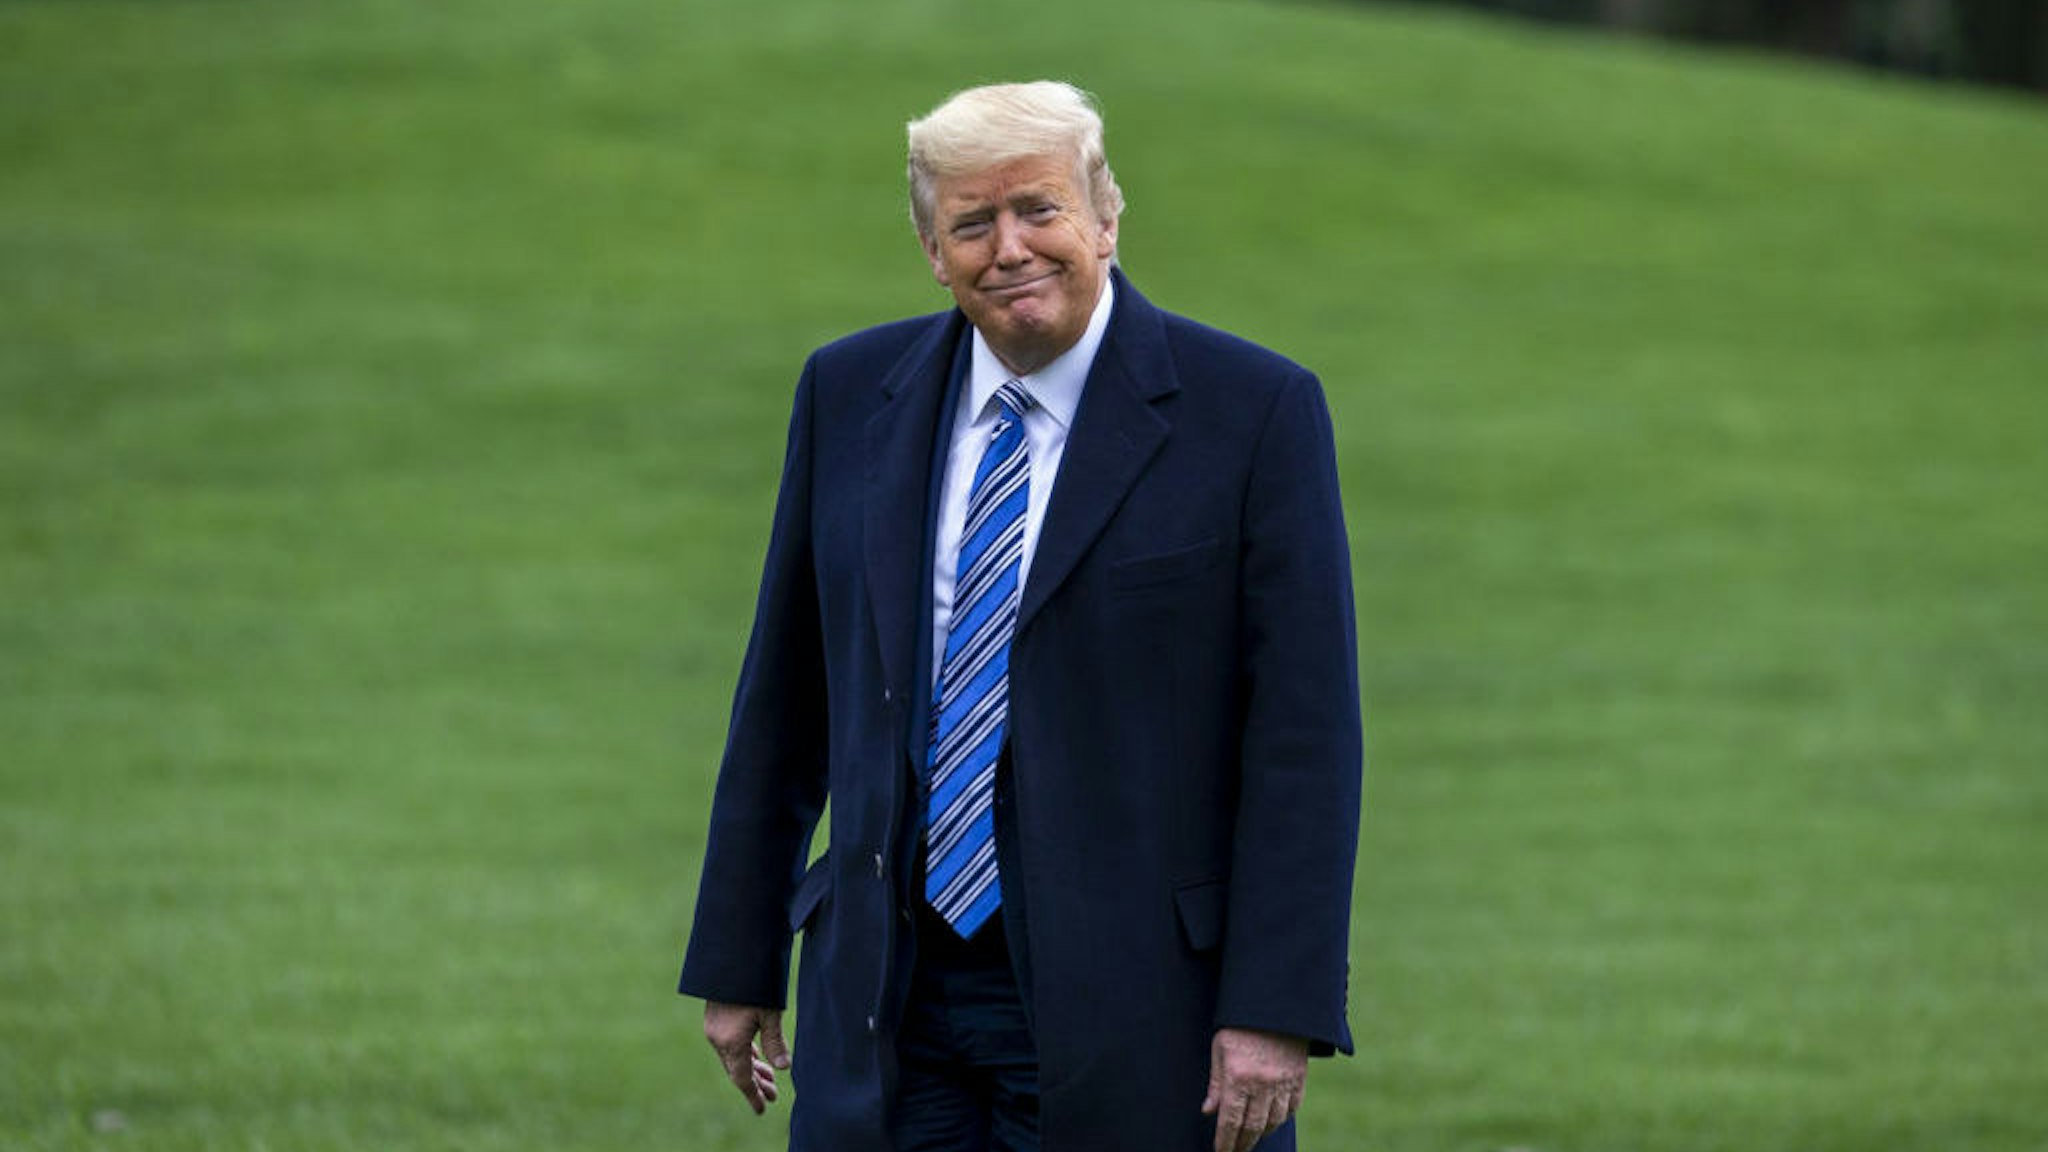 U.S. President Donald Trump smiles while walking on the South Lawn of the White House in Washington, D.C., U.S., on Saturday, March 28, 2020. Trump said he's considering an enforced quarantine for parts of New York, New Jersey and Connecticut to curb the coronavirus outbreak -- a move that could fall afoul of the U.S. Constitution. Photographer: Tasos Katopodis/Bloomberg